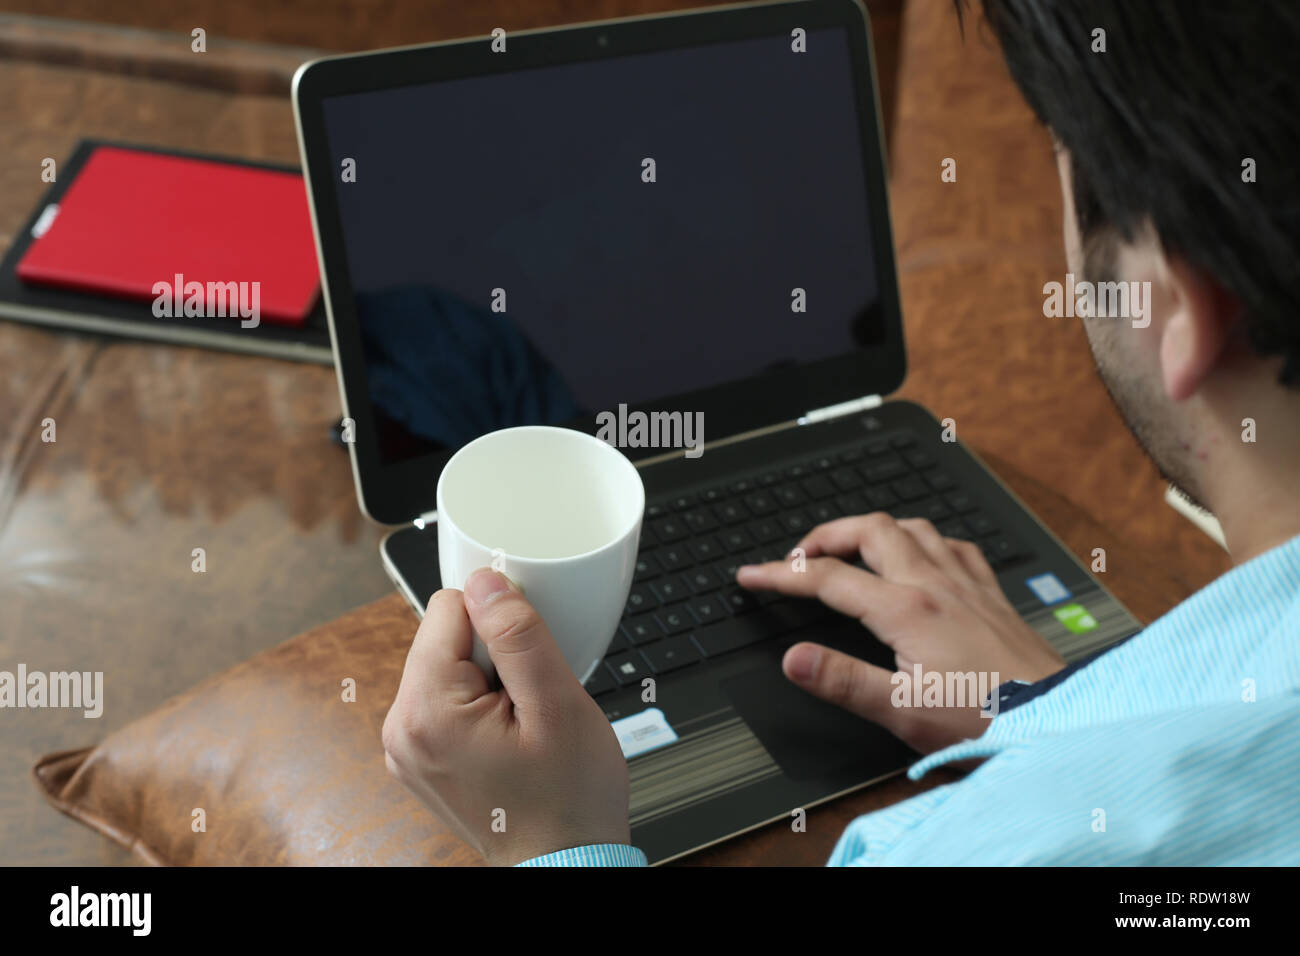 Man is using laptop with holding cup in hand. Stock Photo